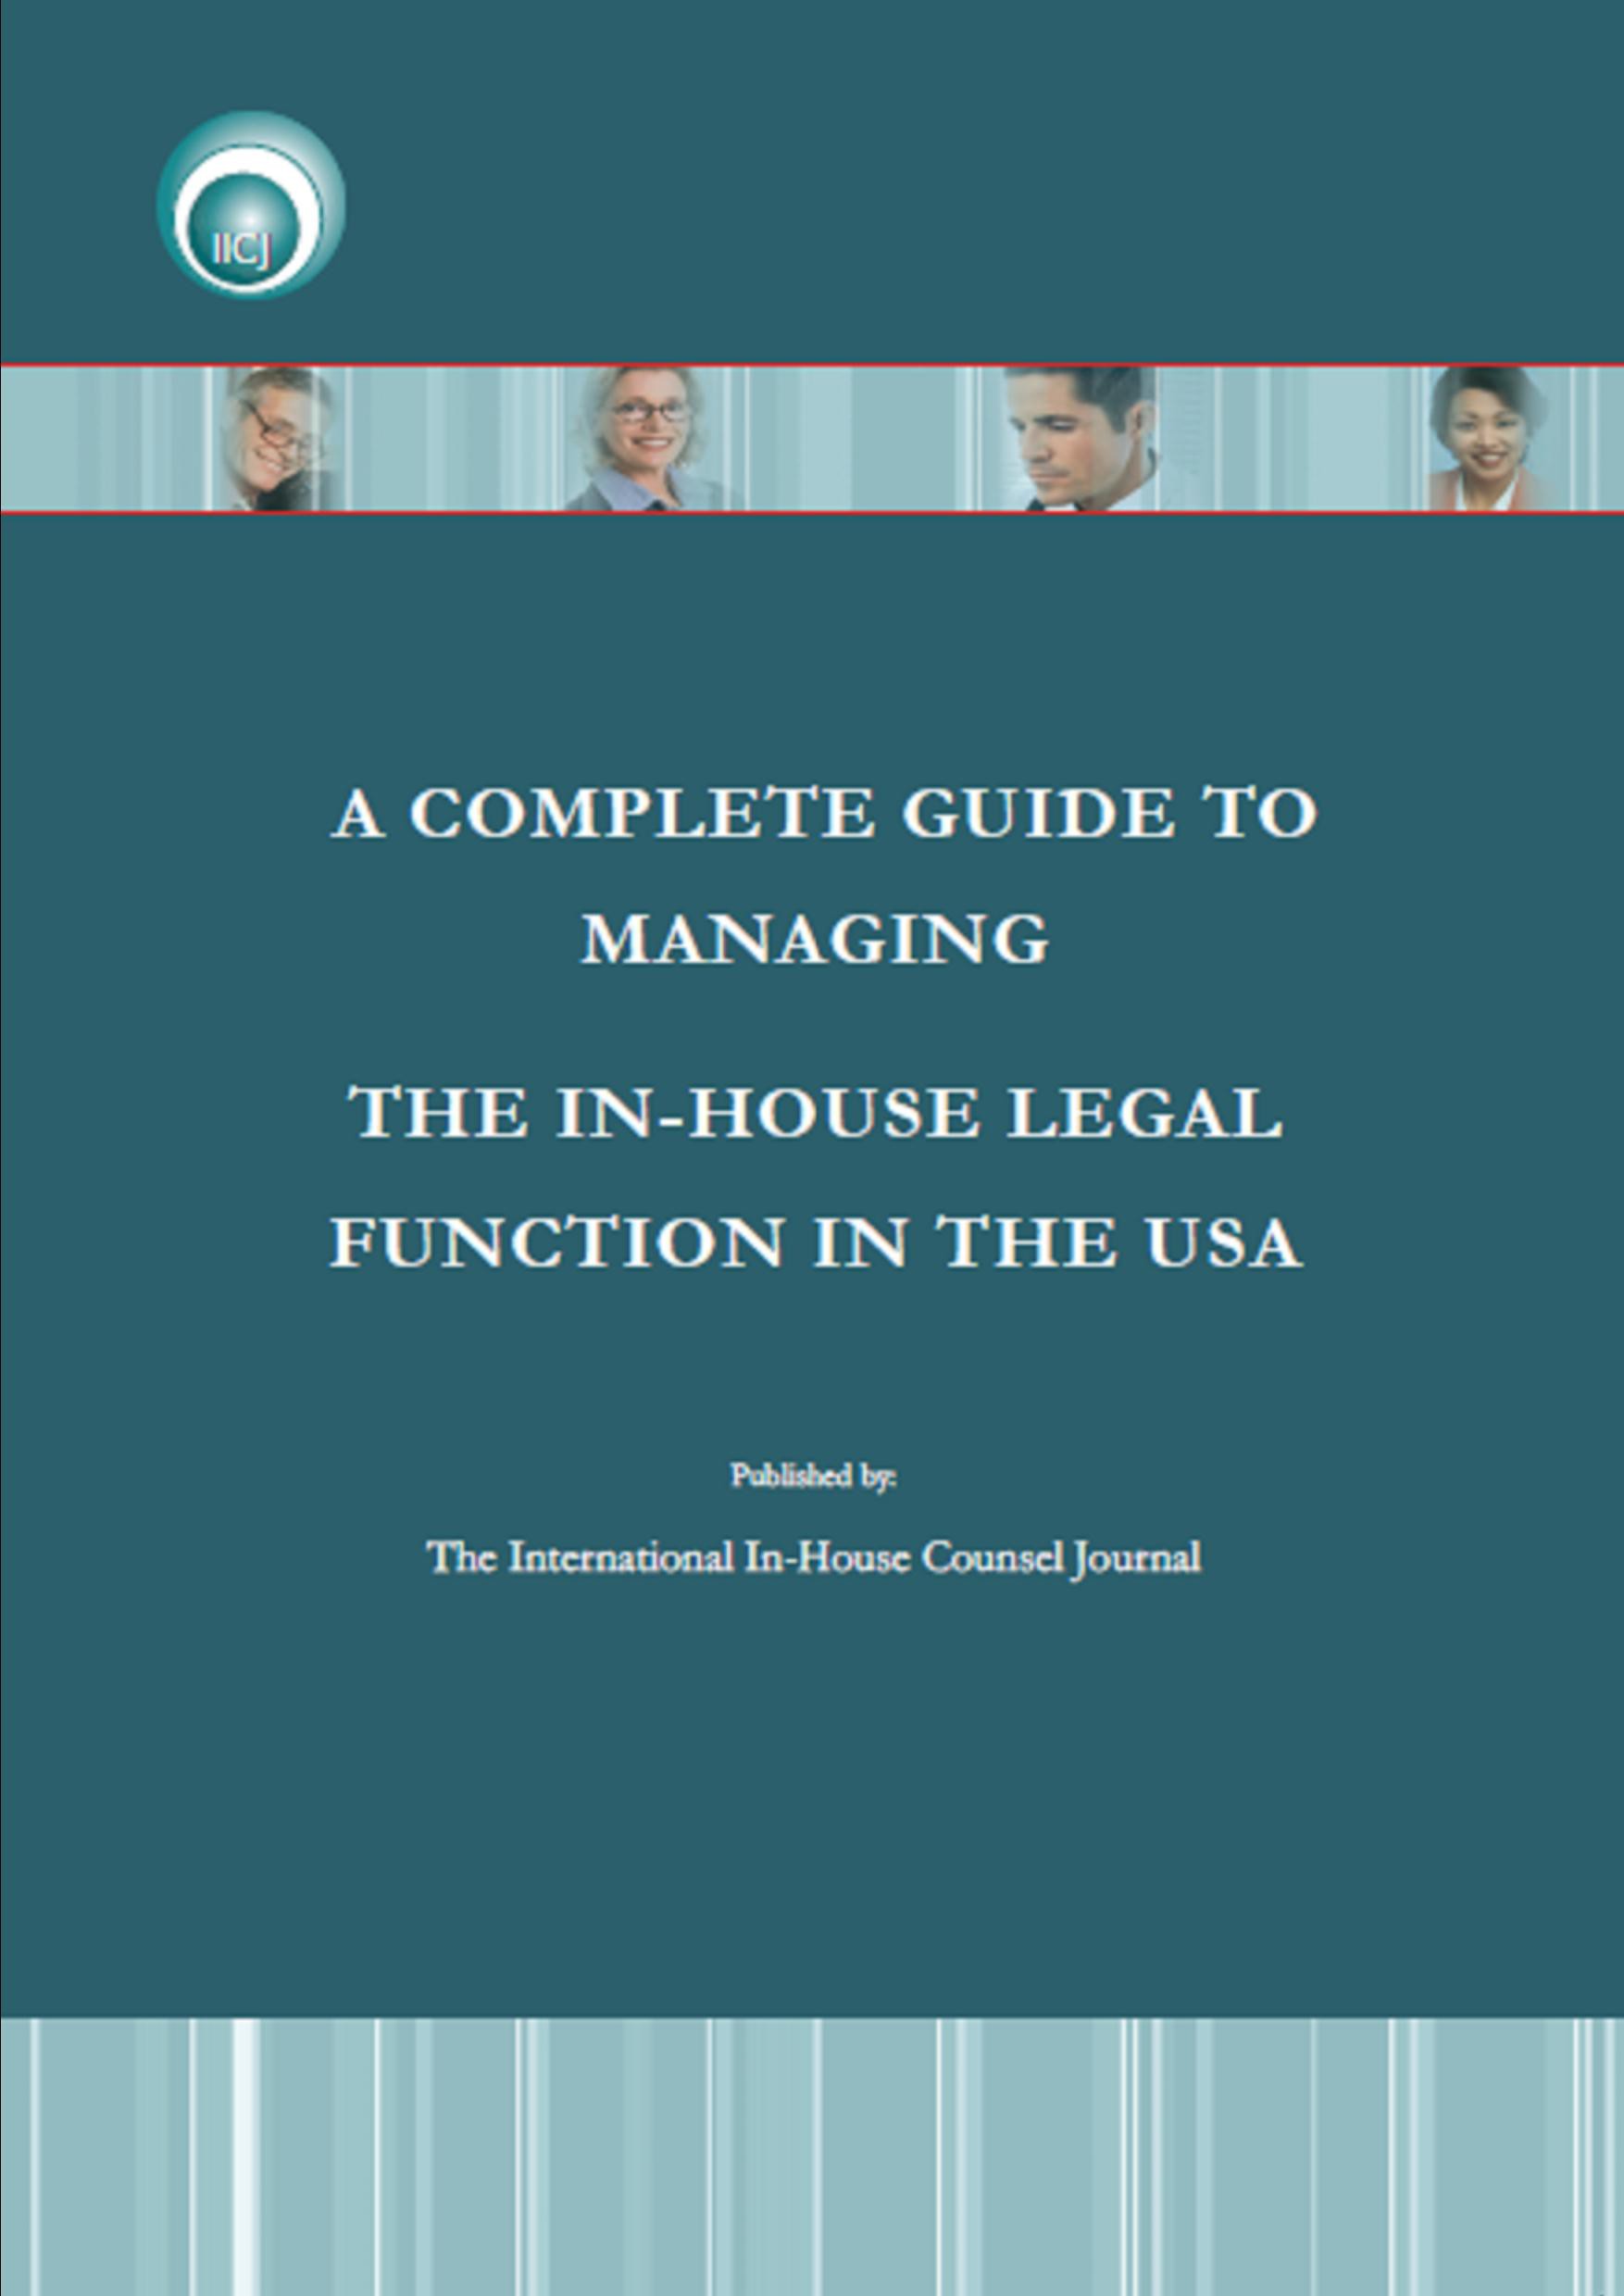 A Complete Guide to Managing the In-house Counsel Function in the USA